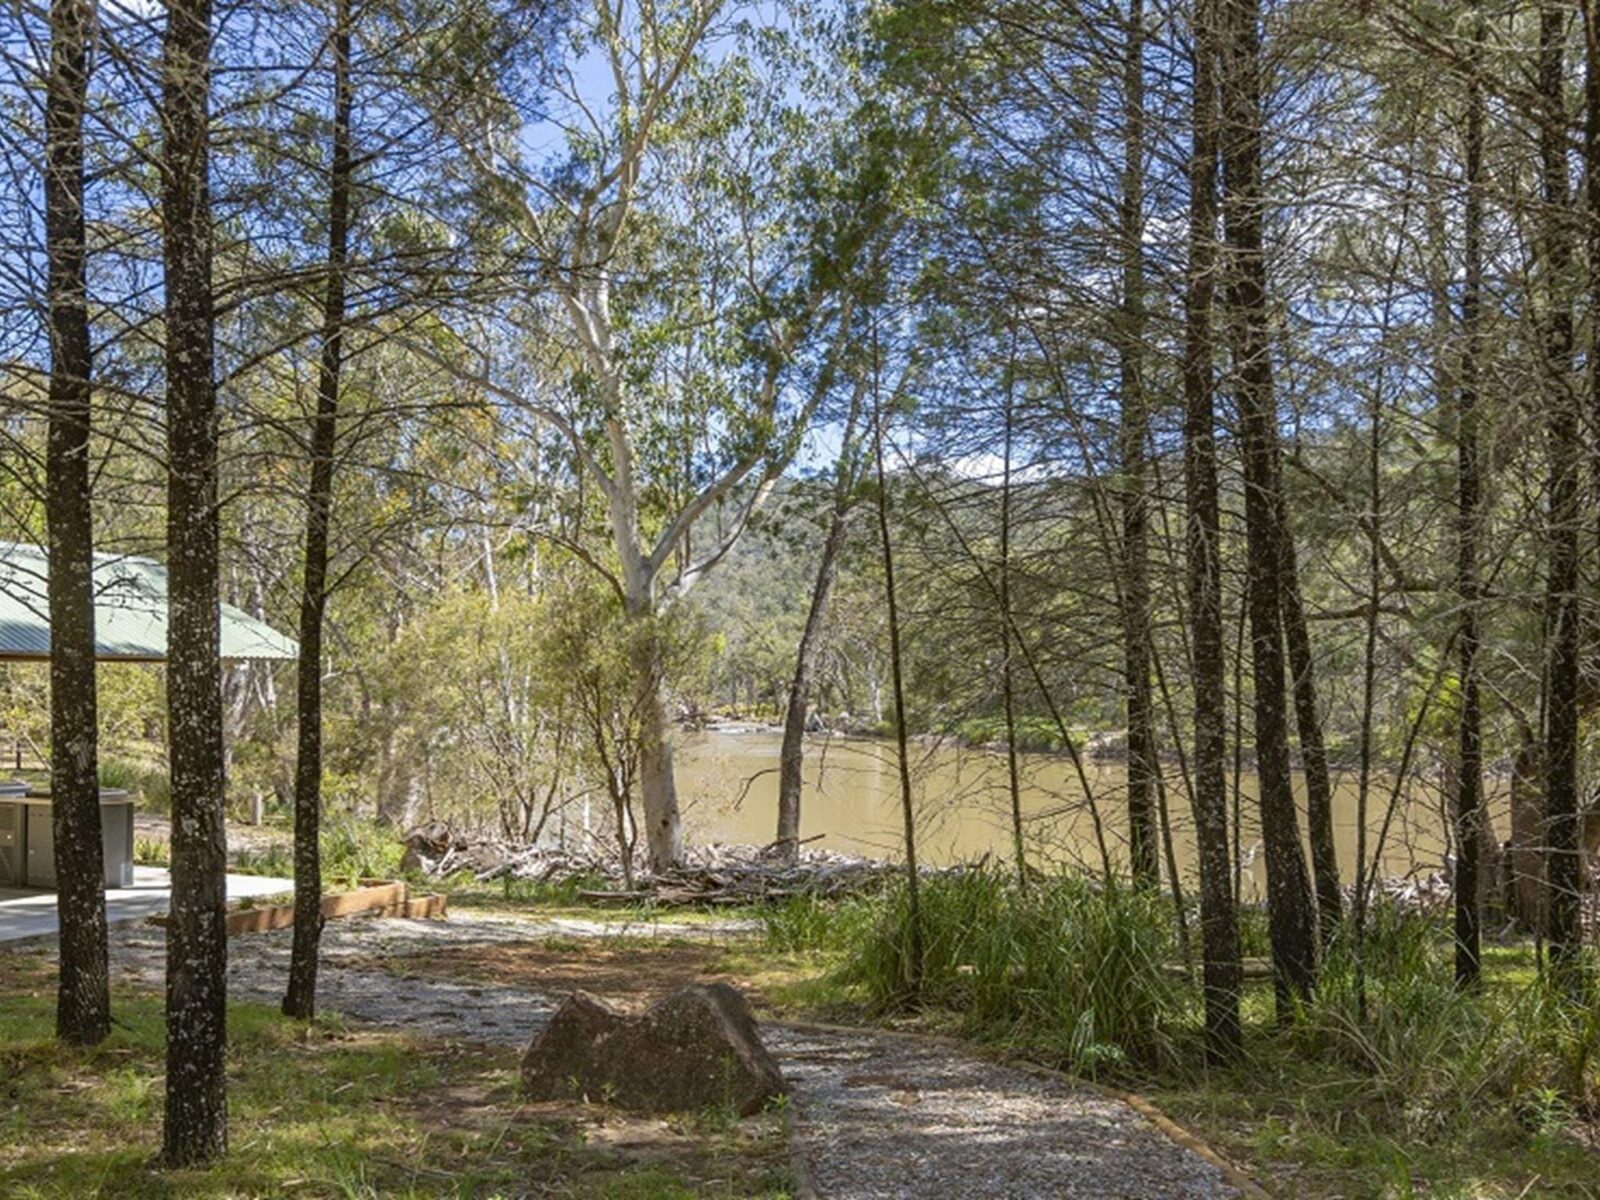 Covered barbecue area amongst the trees, overlooking the river, Warrabah National Park. Photo: